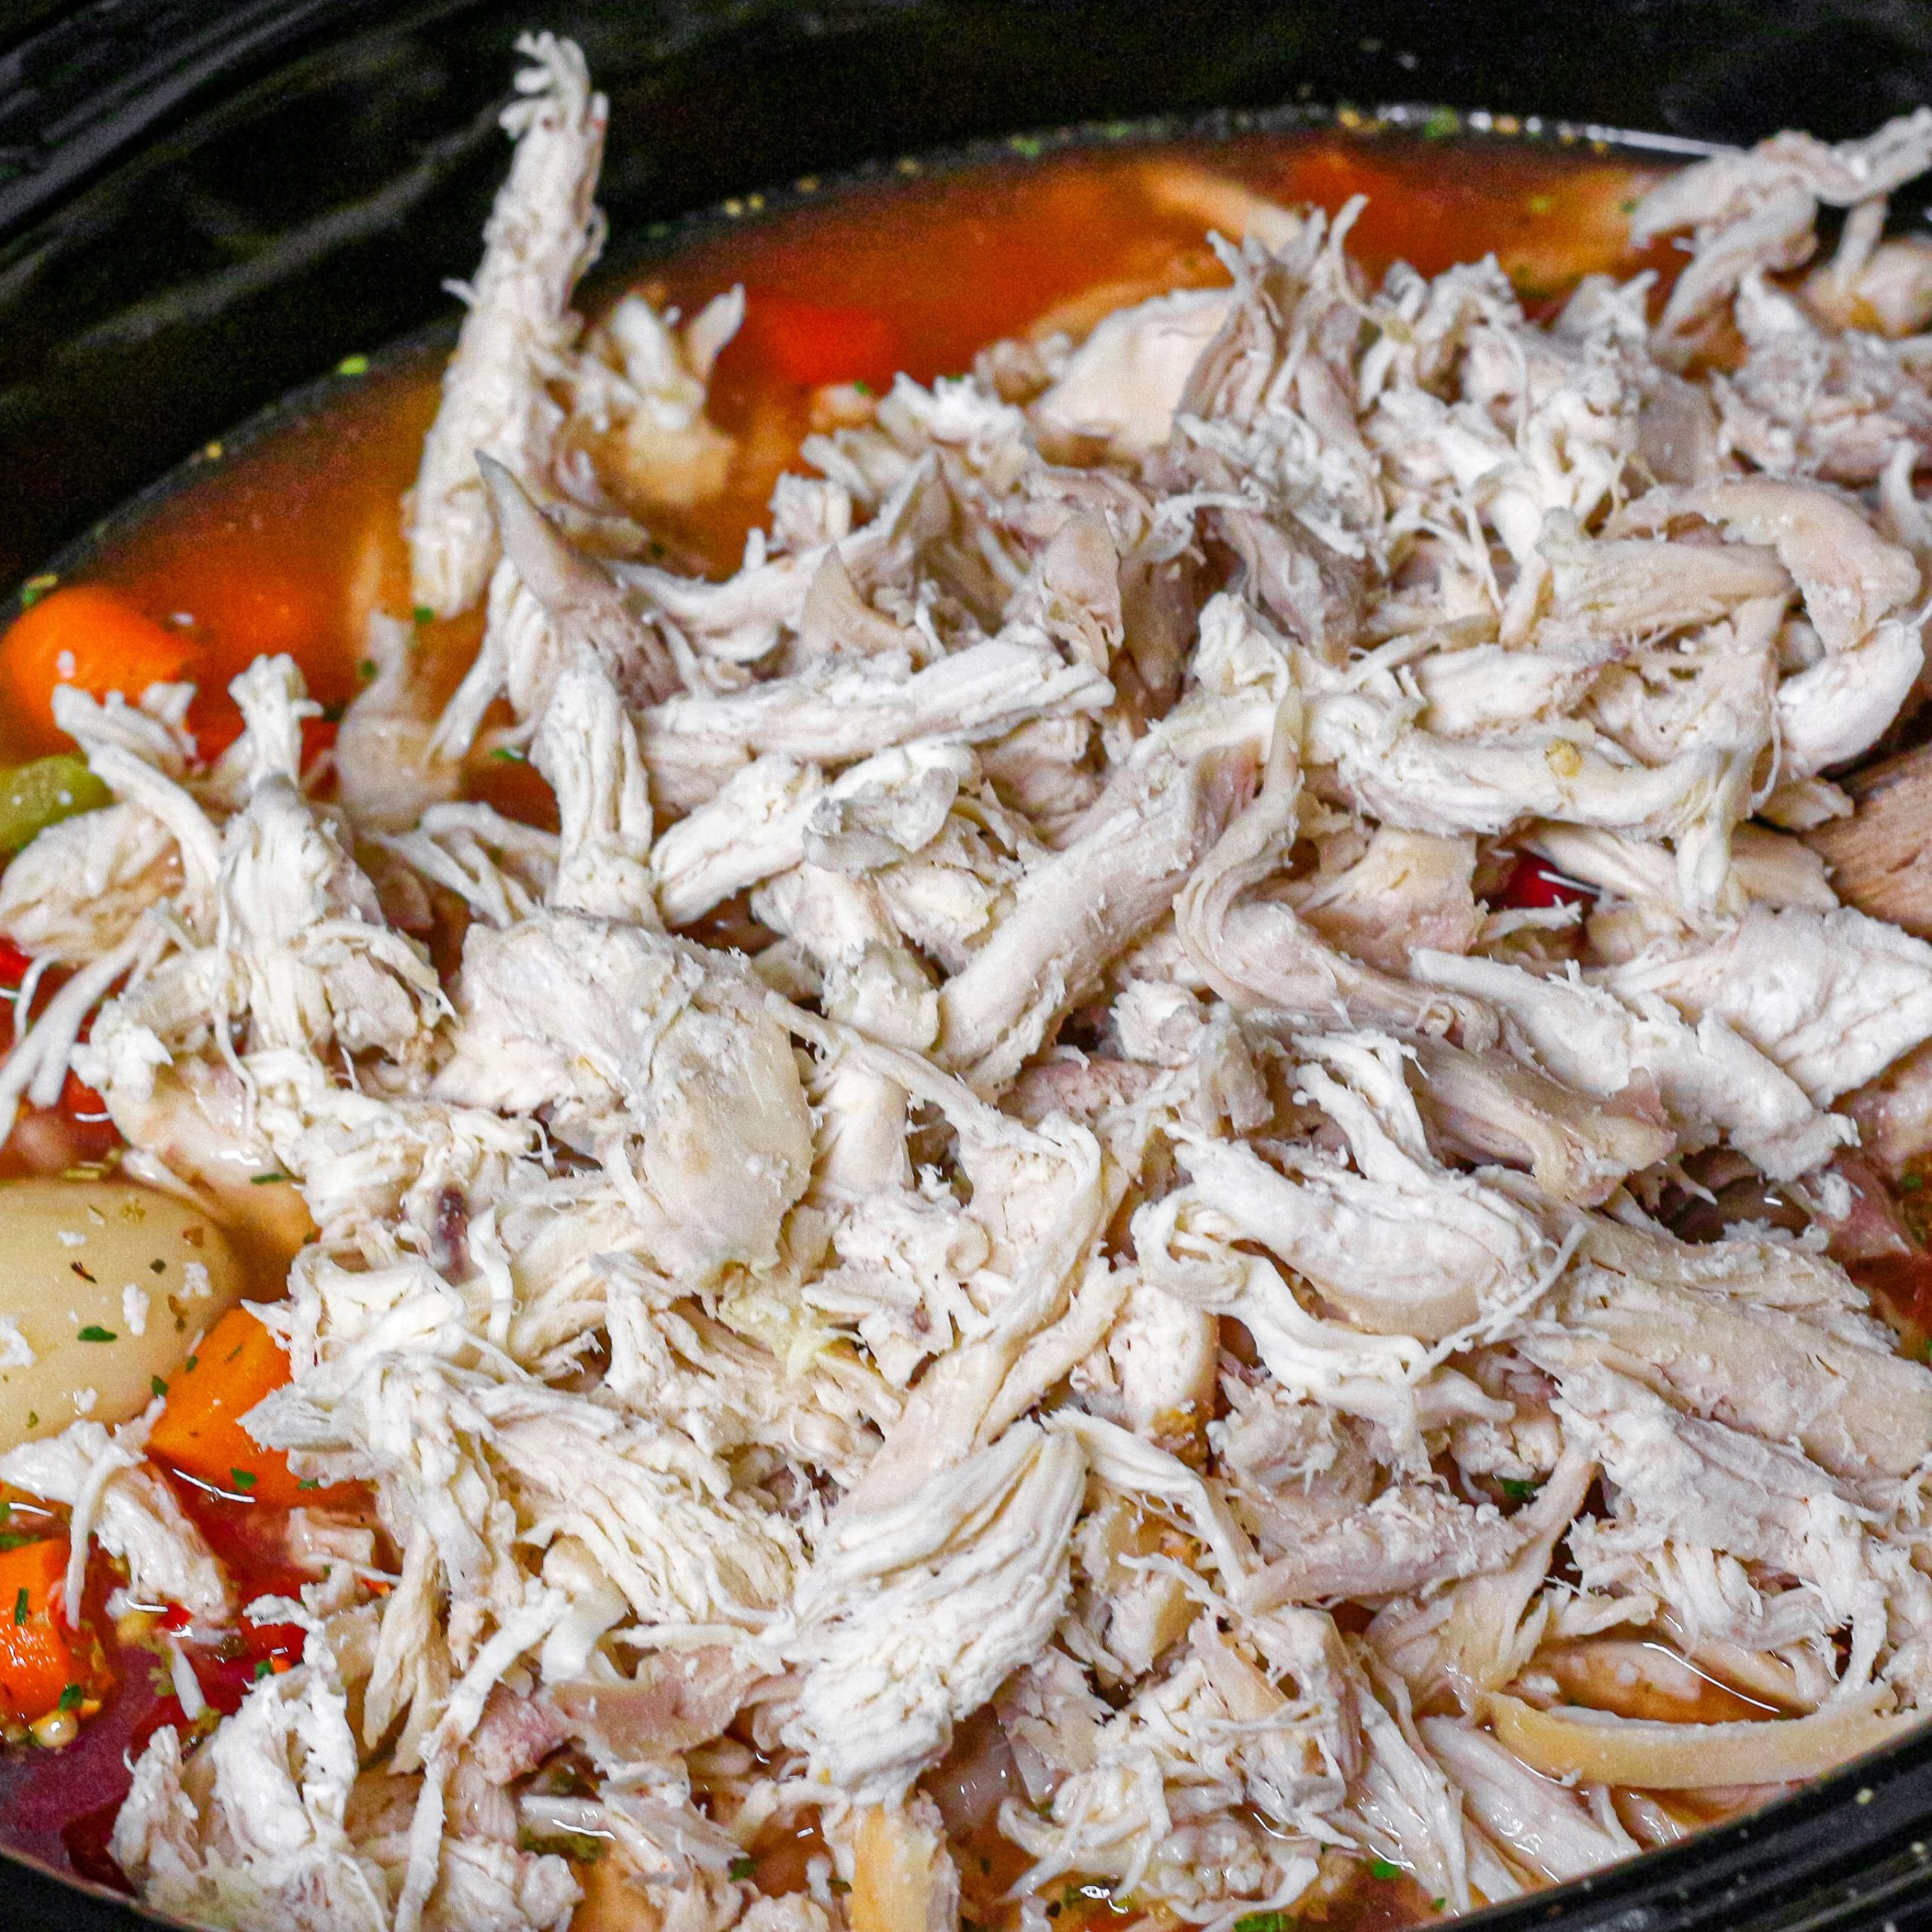 Add the chicken, vegetables, tomatoes, about 8 cups of water, parsley, minced garlic, salt, and pepper in a crockpot.